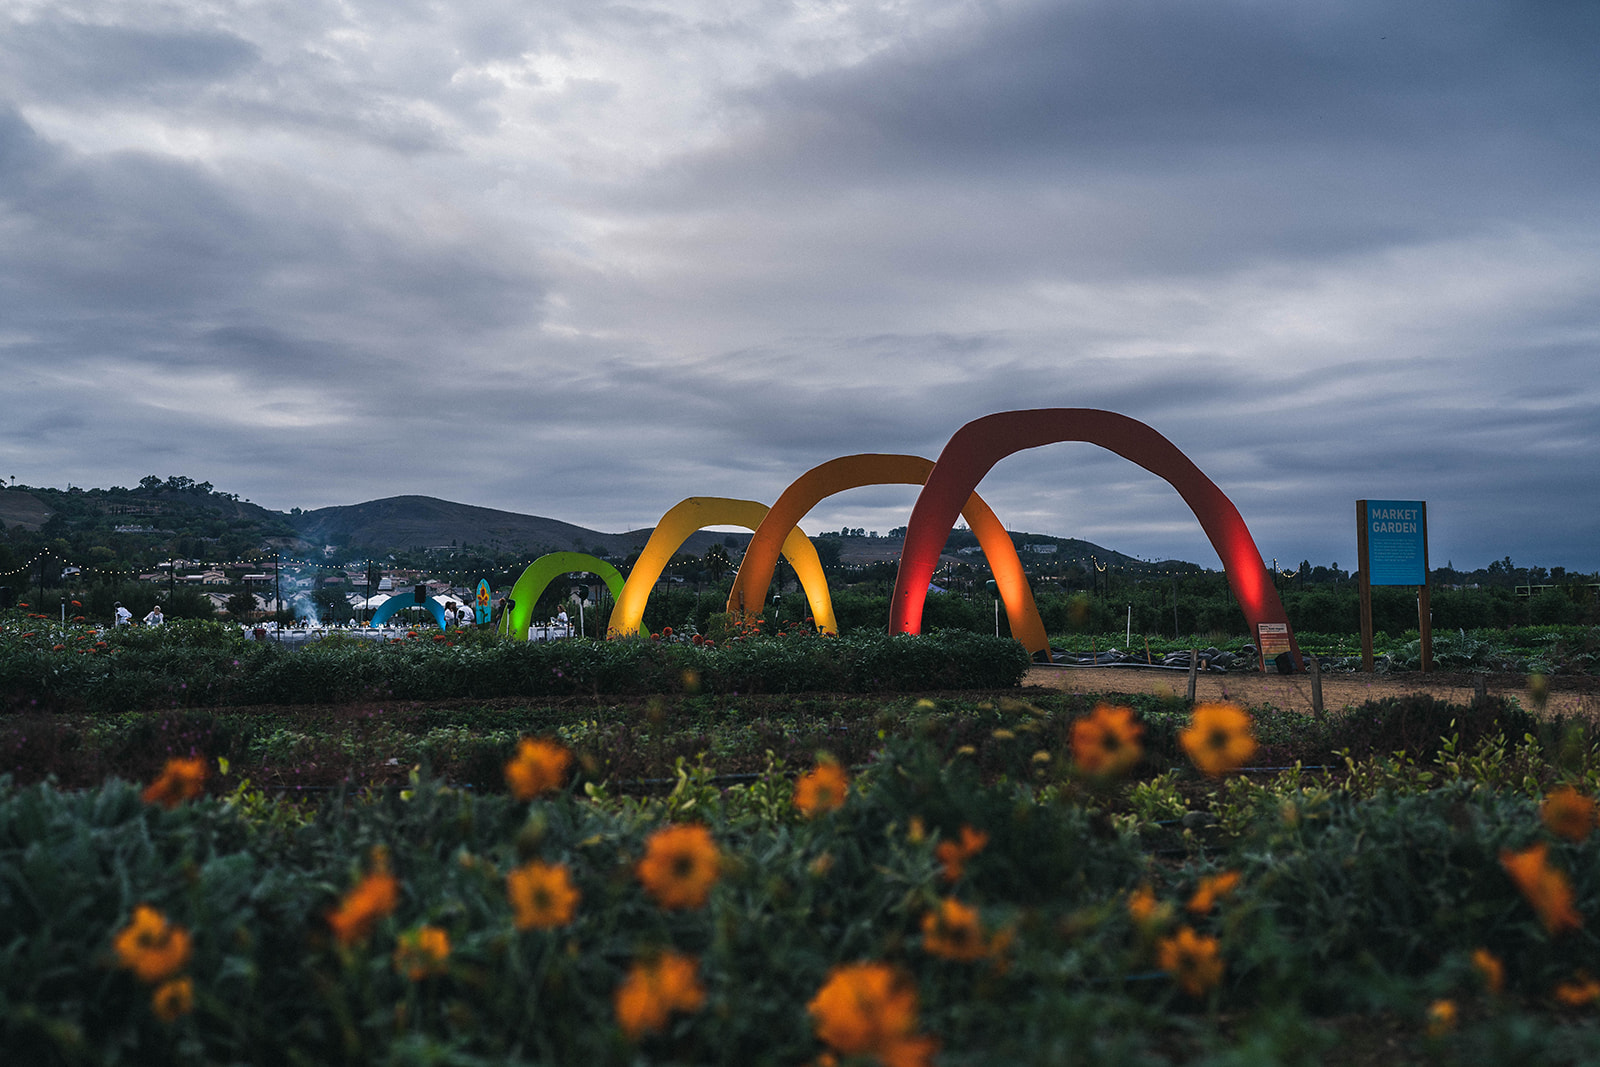 Rainbow sculpture in the field with a cloudy sky